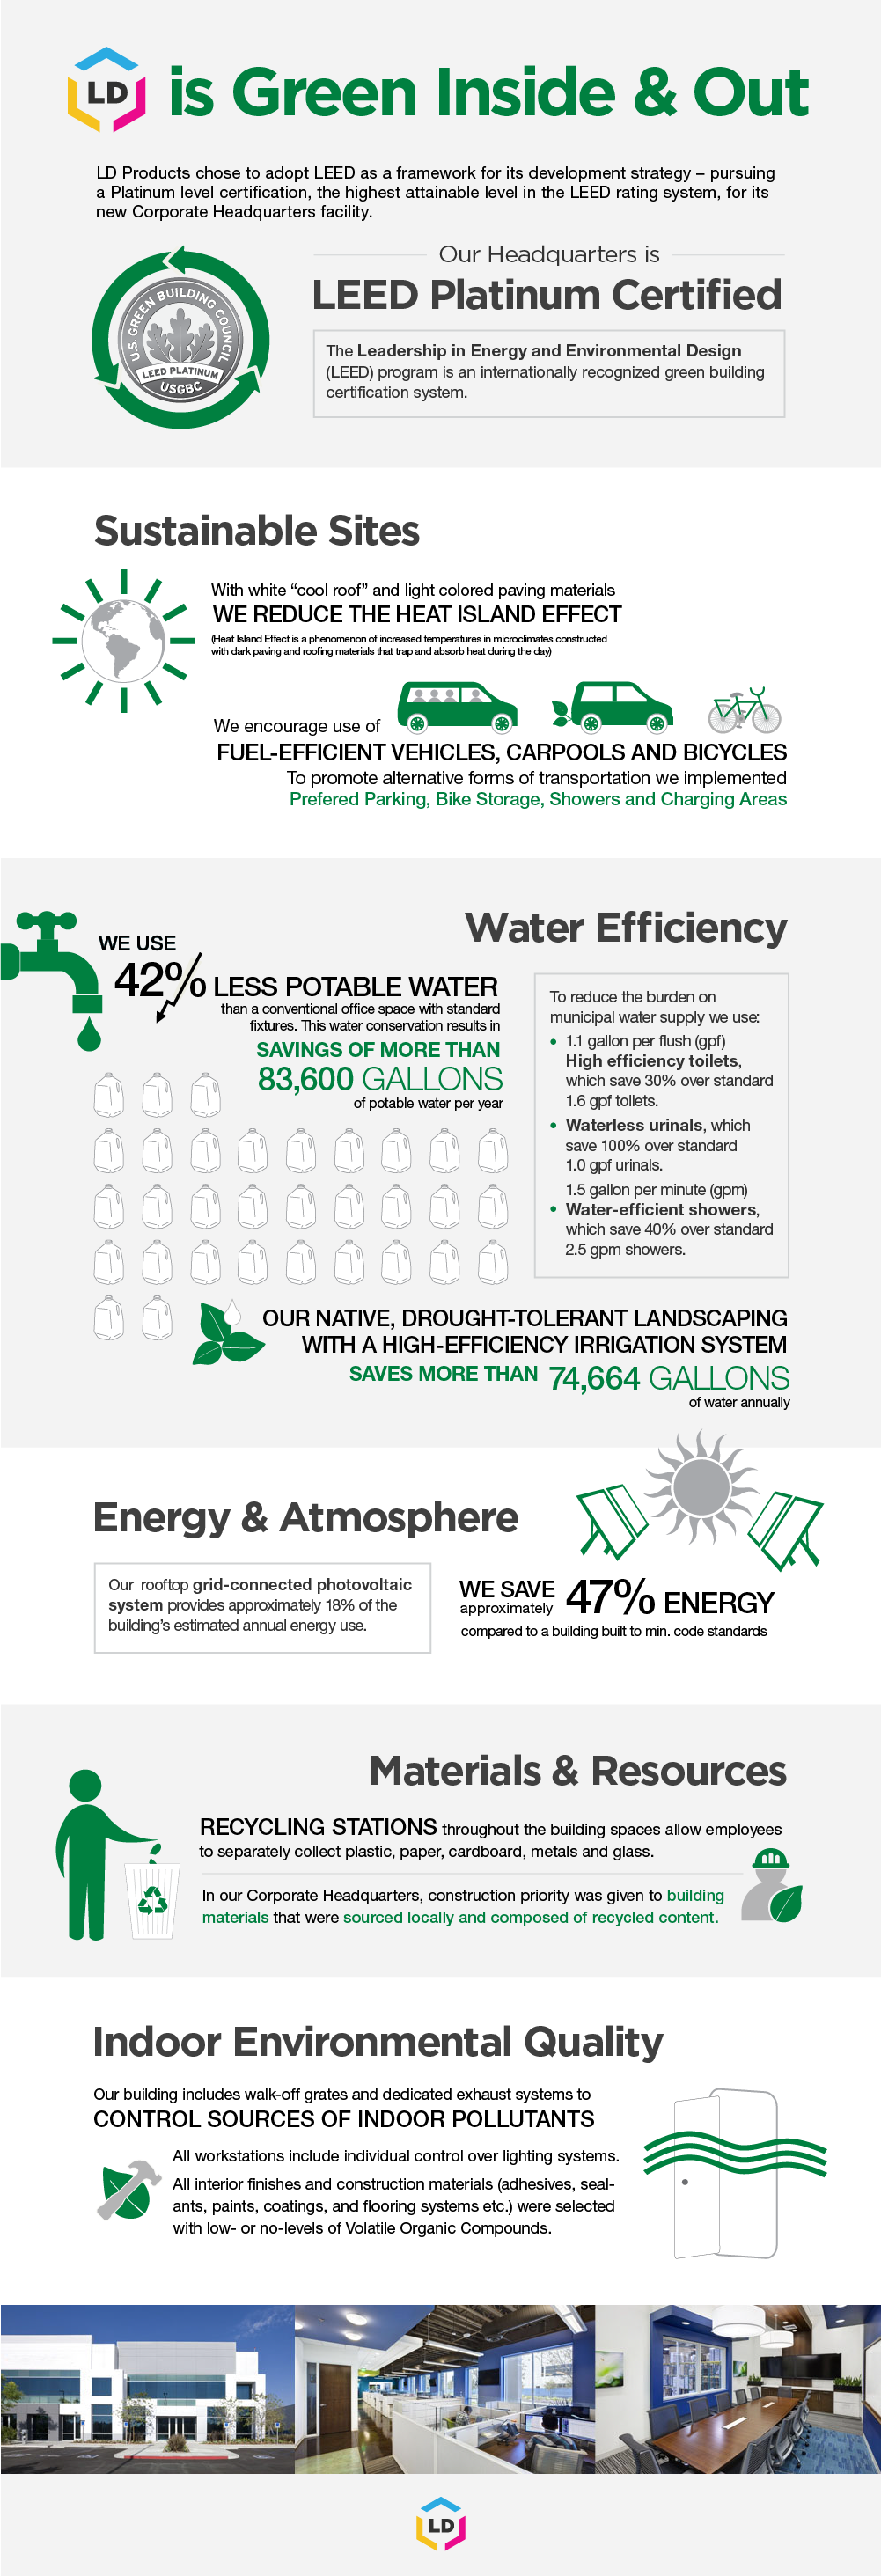 LD is Green Inside & Out Infographic